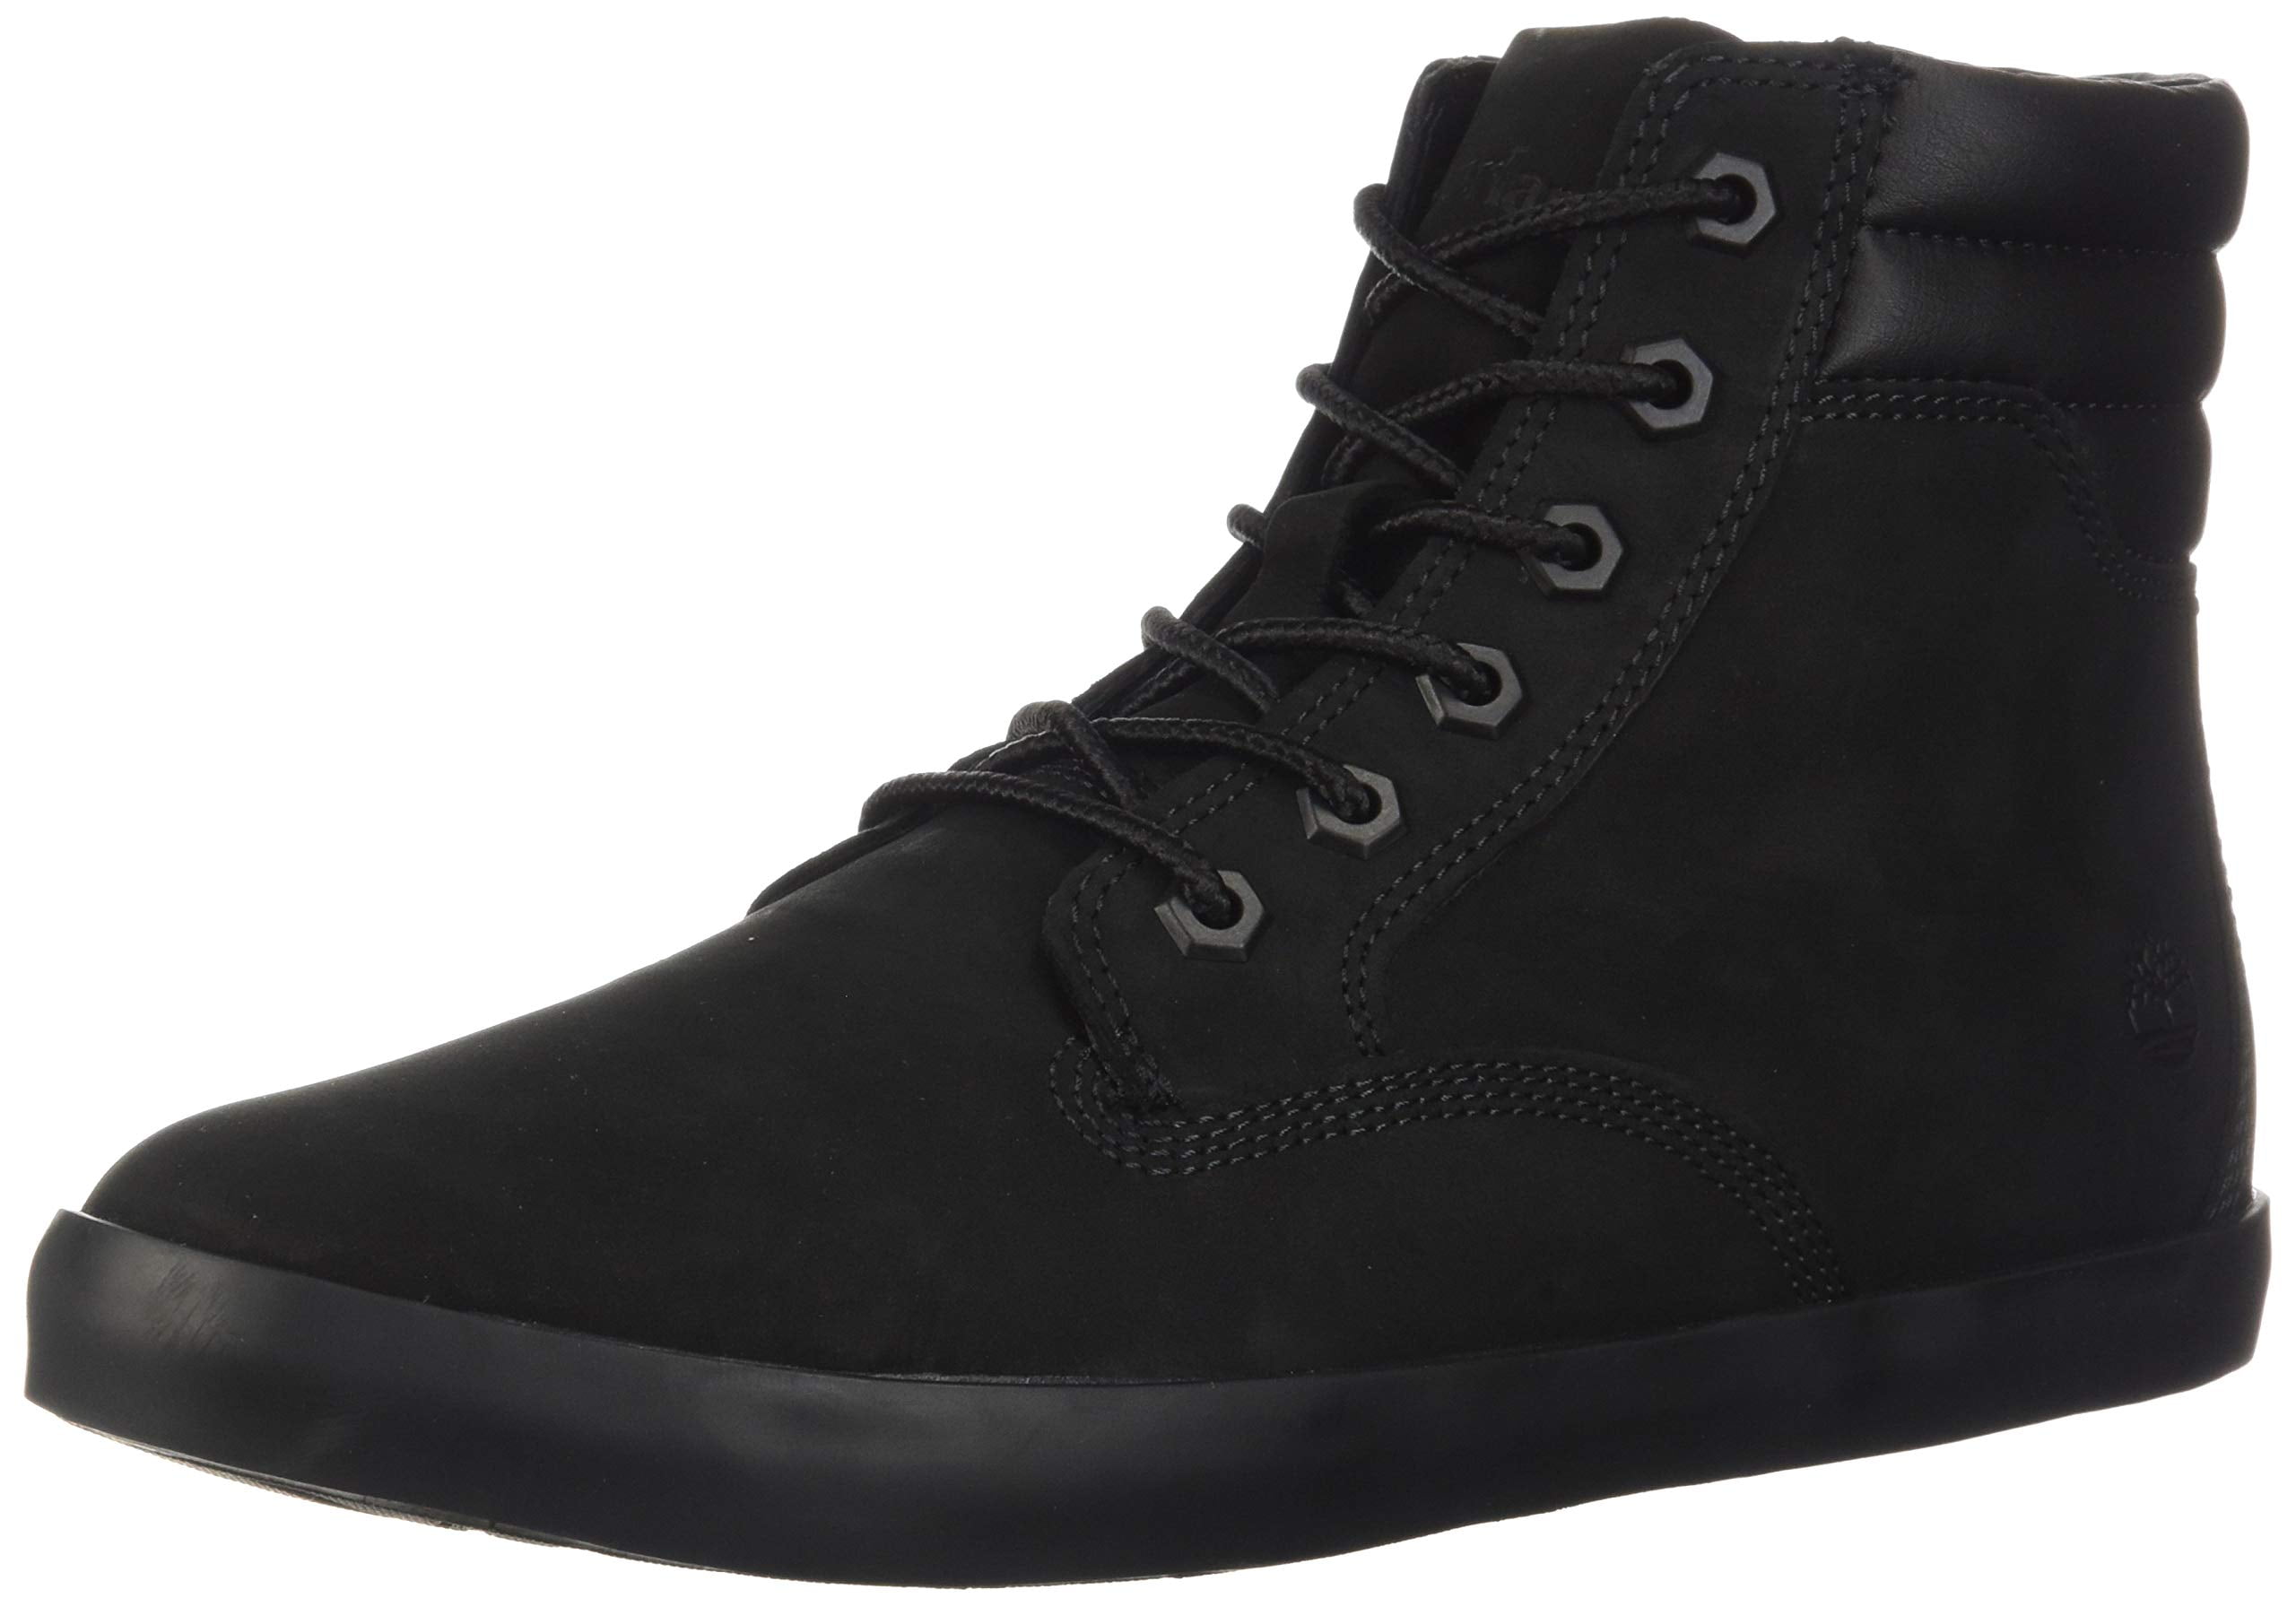 Men's Boots & Booties | Free Shipping | DSW